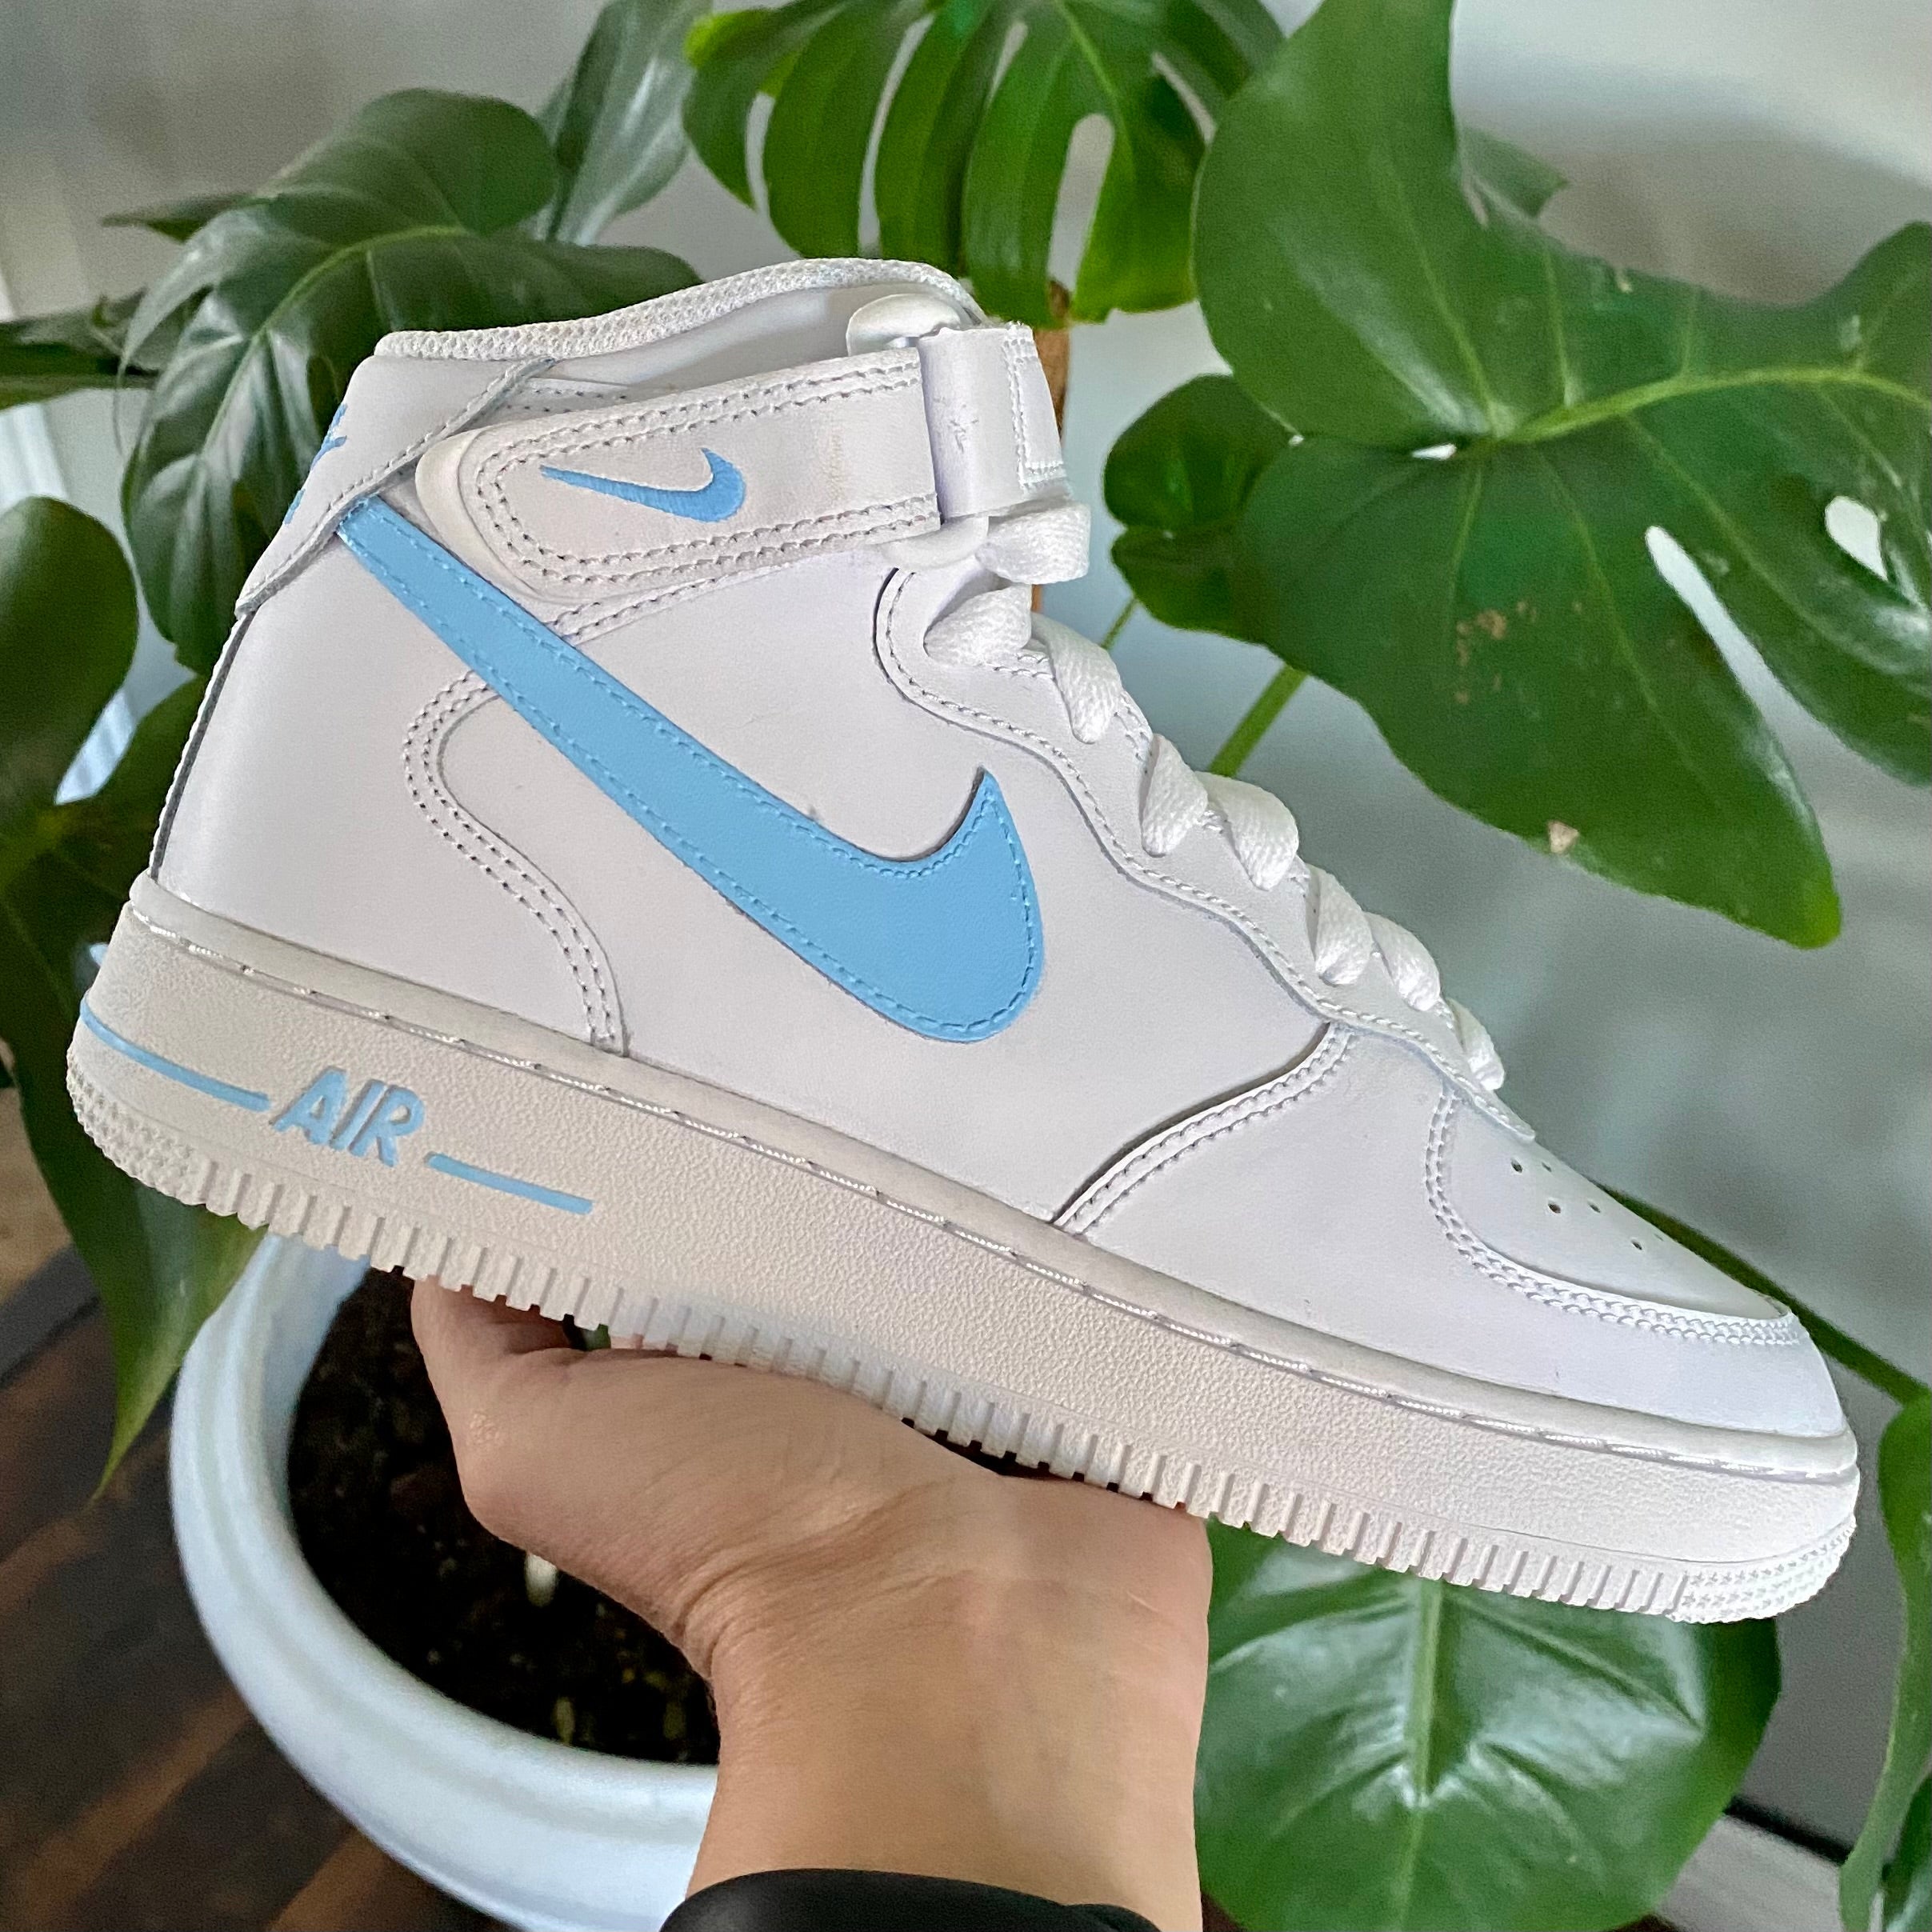 Custom Air Force 1s with light blue and navy 3D Nike Swoosh